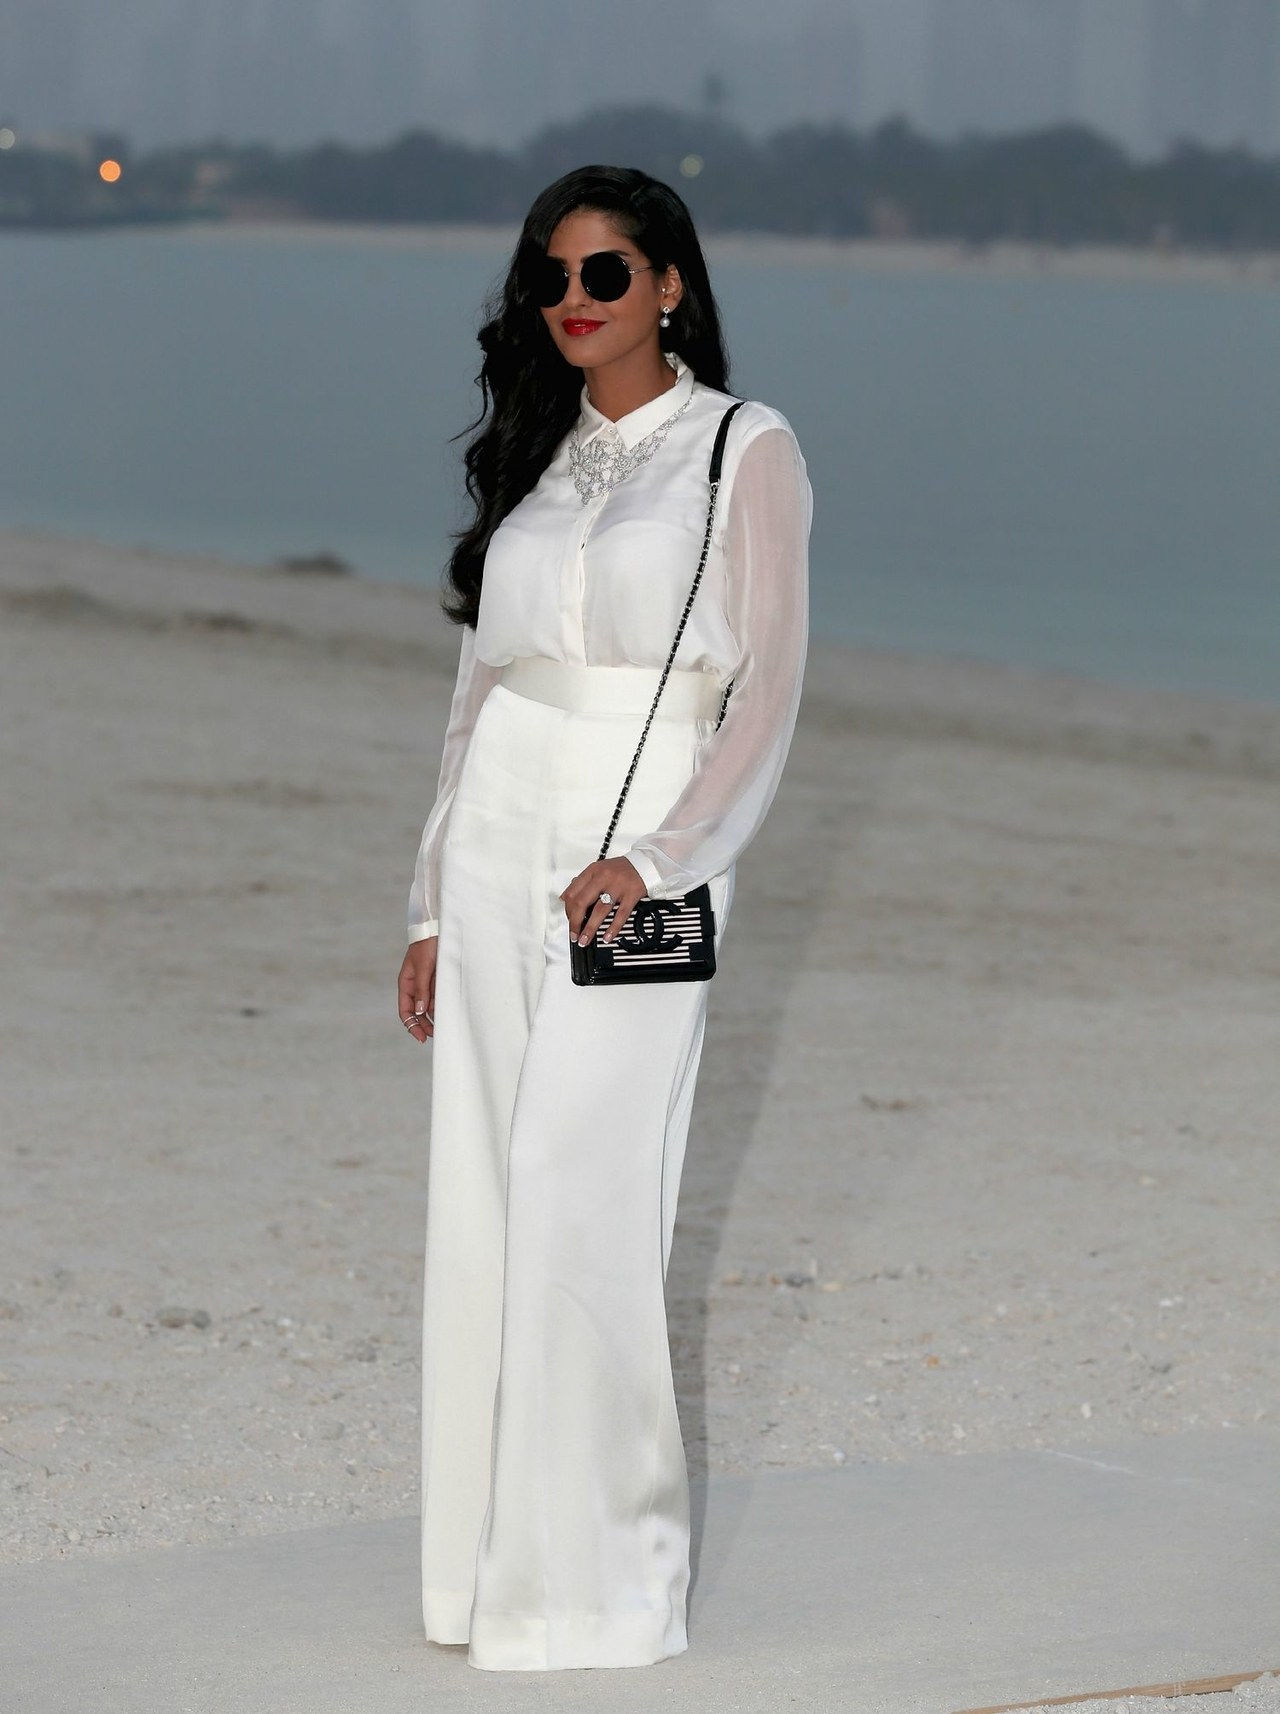 Prinzessin ameerah chanel couture show white pants